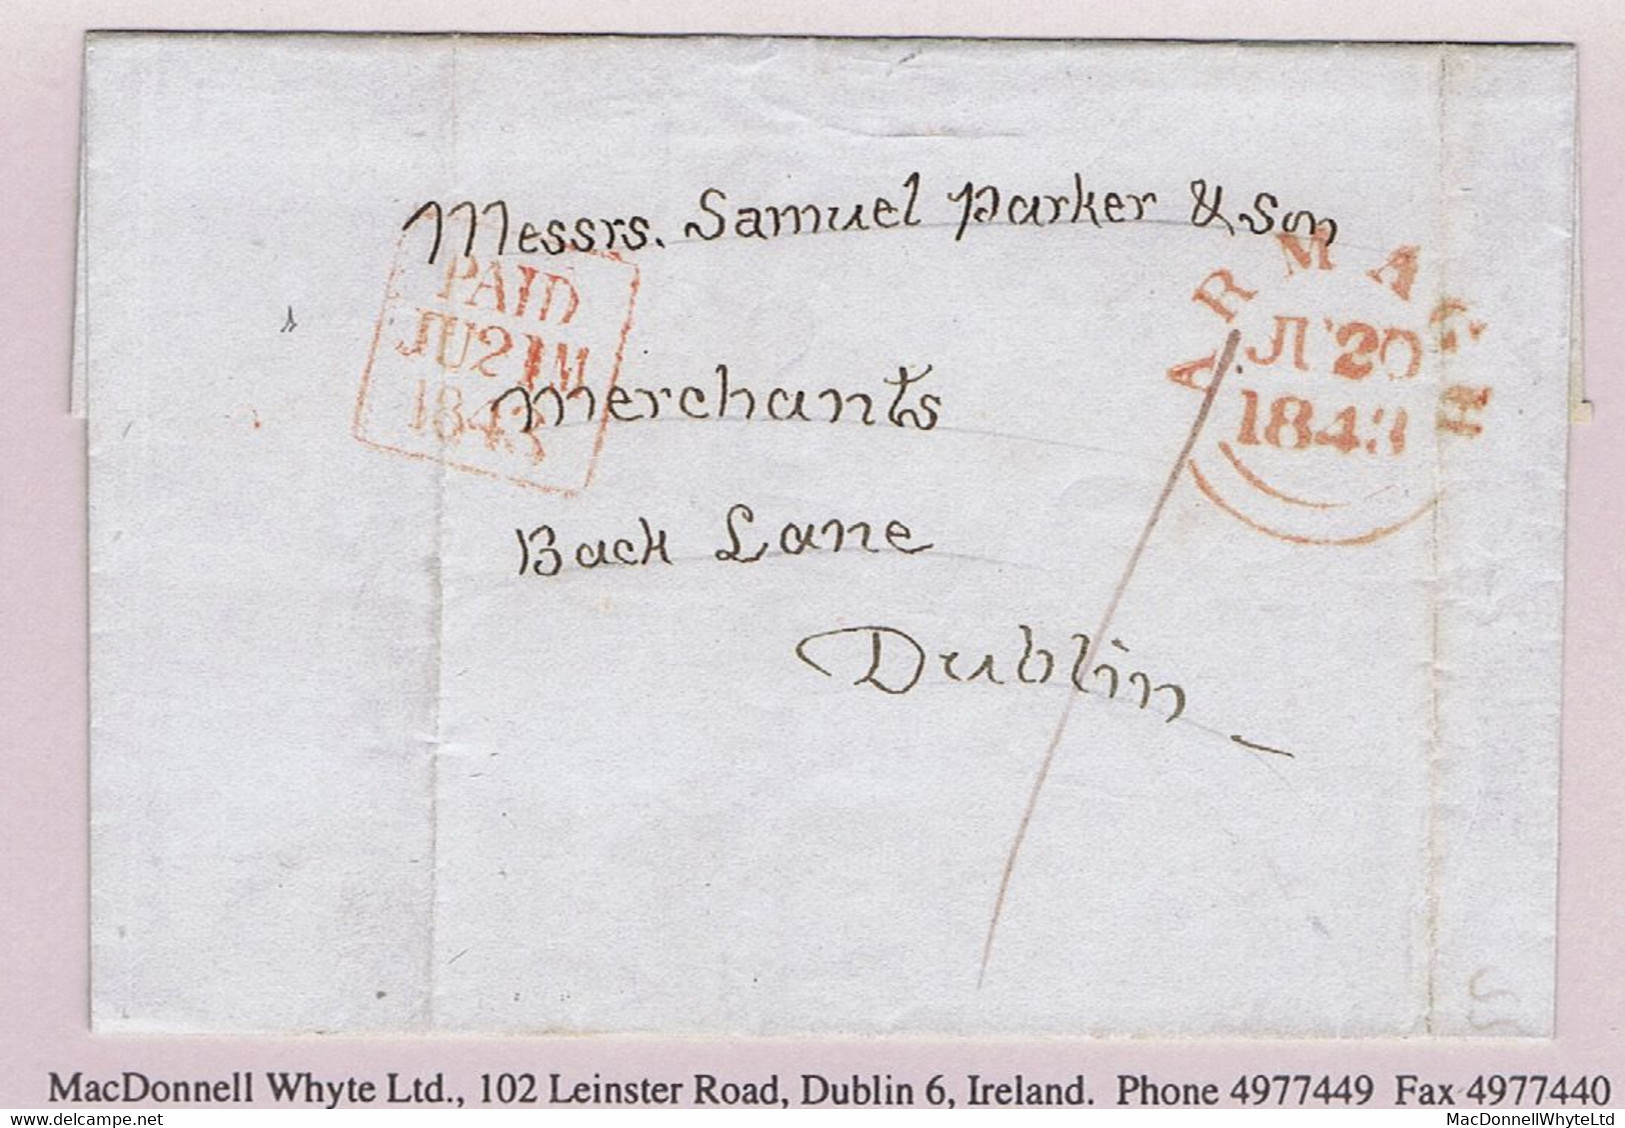 Ireland Armagh Uniform Penny Post 1844 Cover Maguiresbridge To Dublin Prepaid "1" With ARMAGH JU 20 1843 Cds In Red - Vorphilatelie